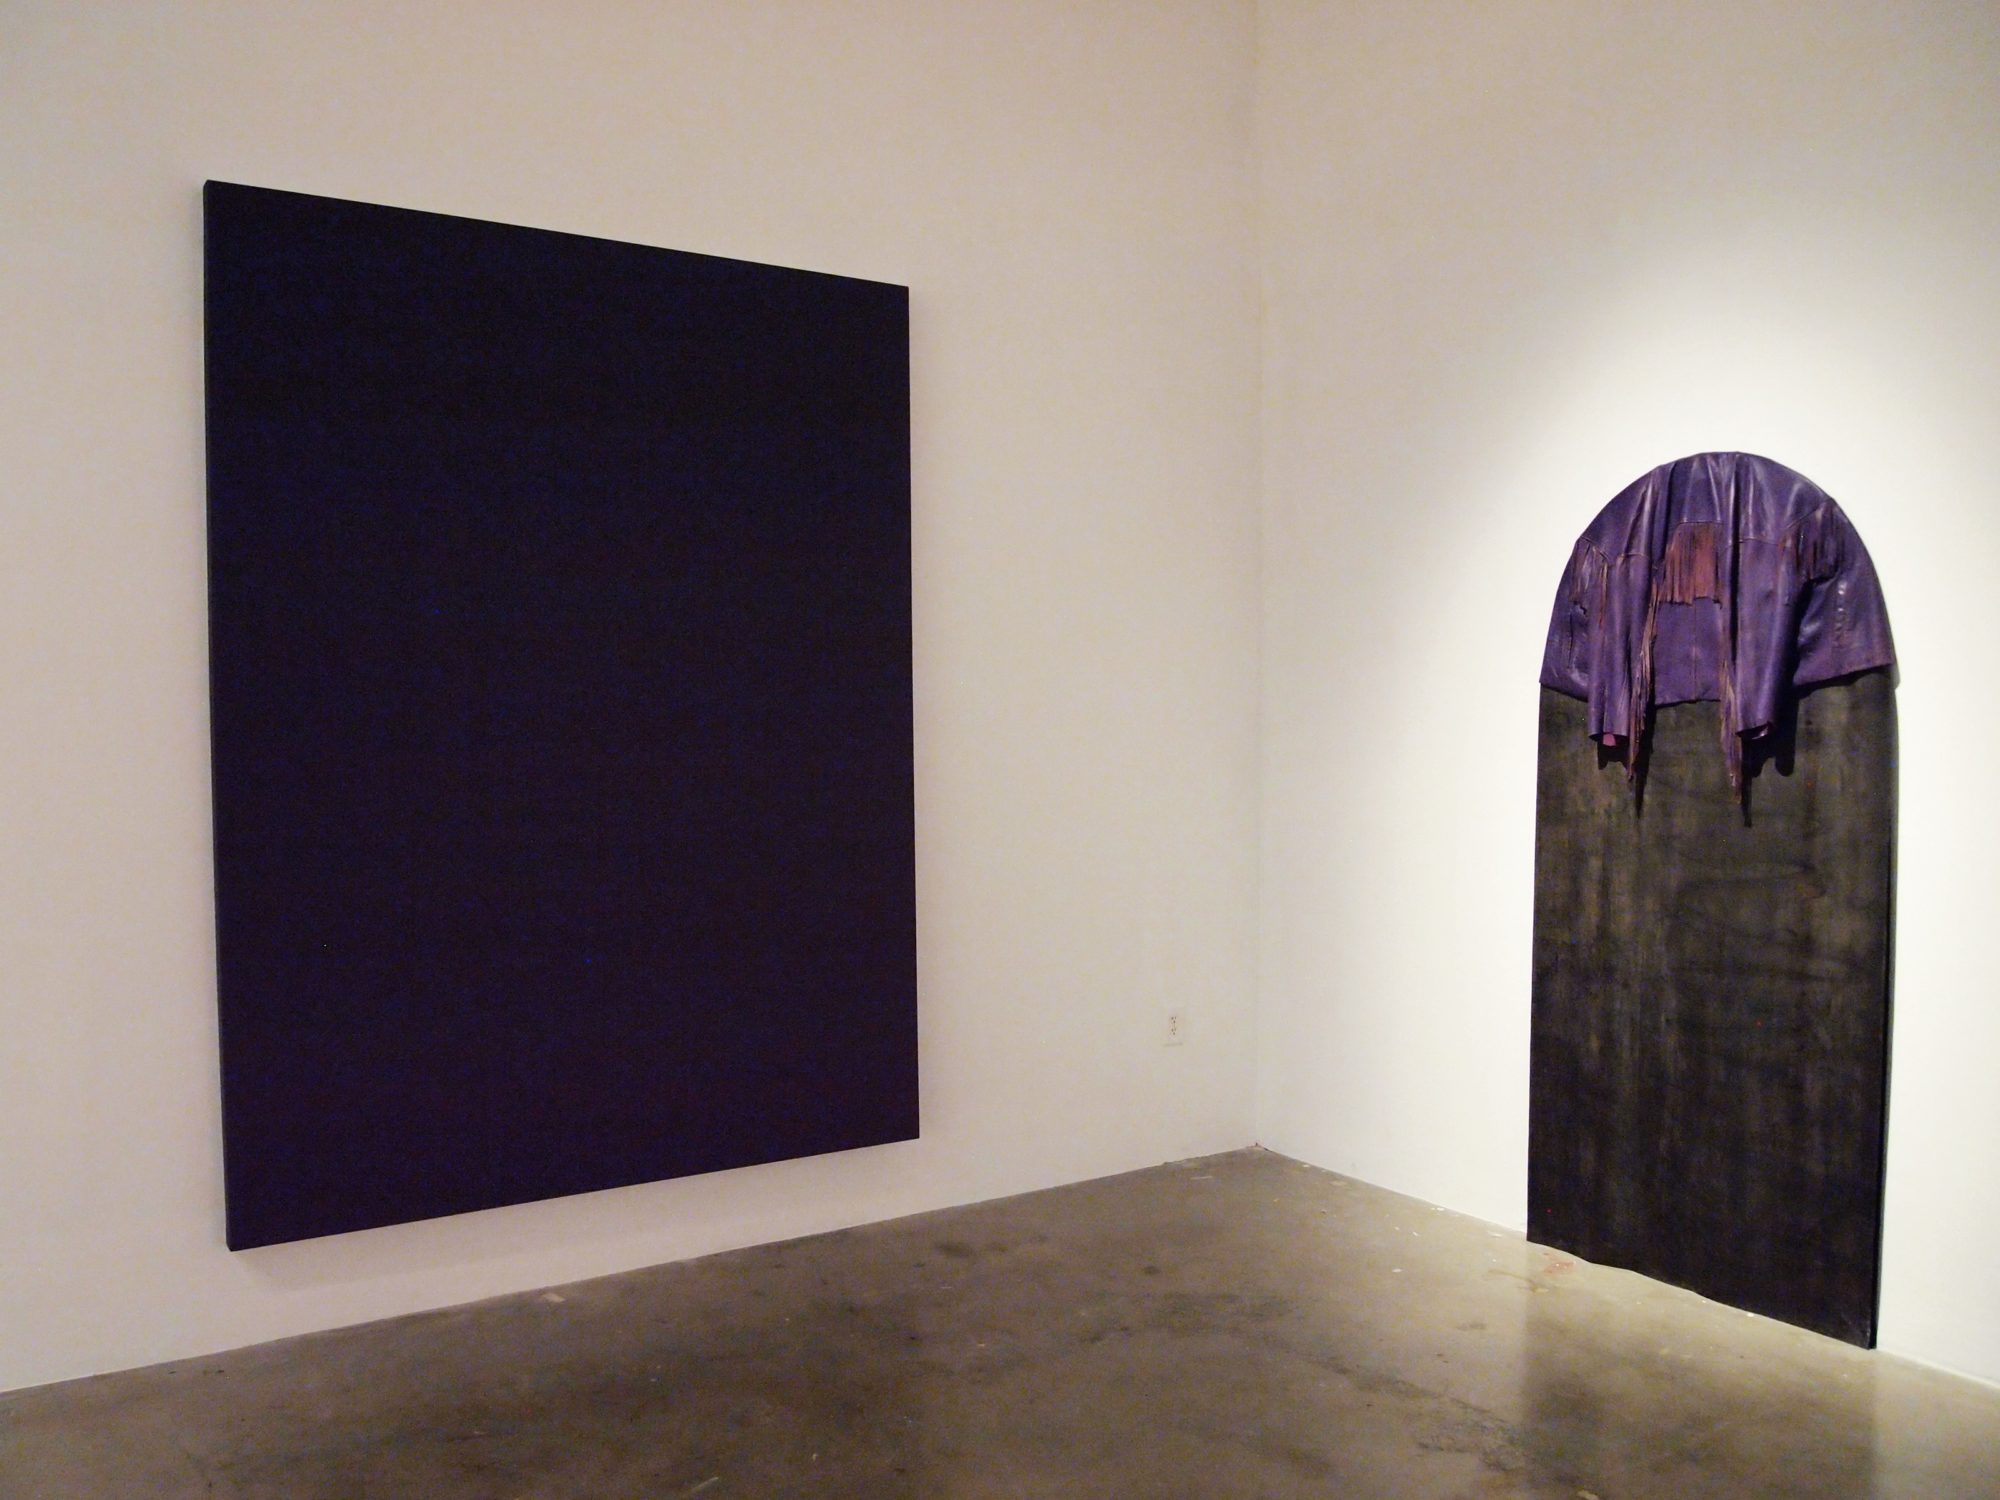 gallery scene showing a large black canvas and a a large, black tombstone shaped piece with a purple leather jacket draped across the top